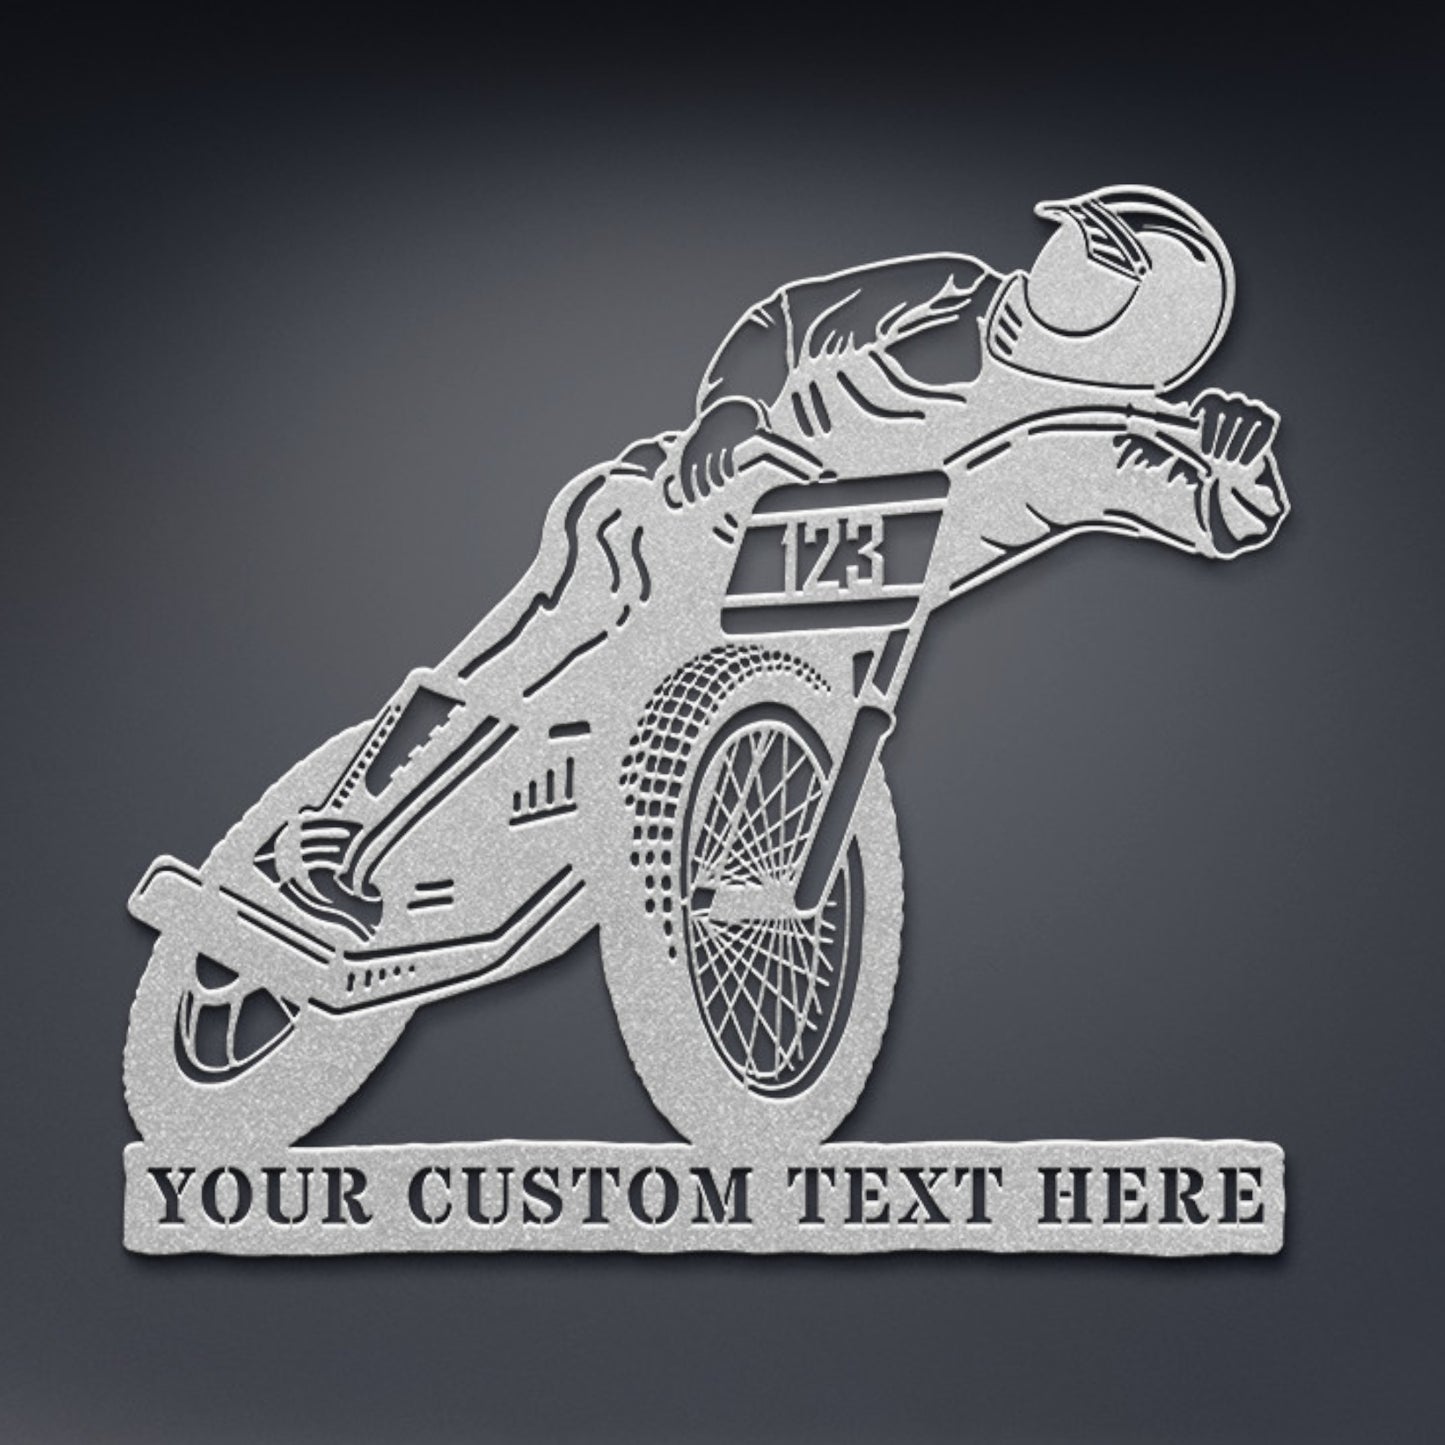 Personalized Speedway Motocross Metal Sign With Custom Text. Custom Motorcycle Name Sign Gift. Motorbike Wall Decor. Dirt Bike Shop Decor